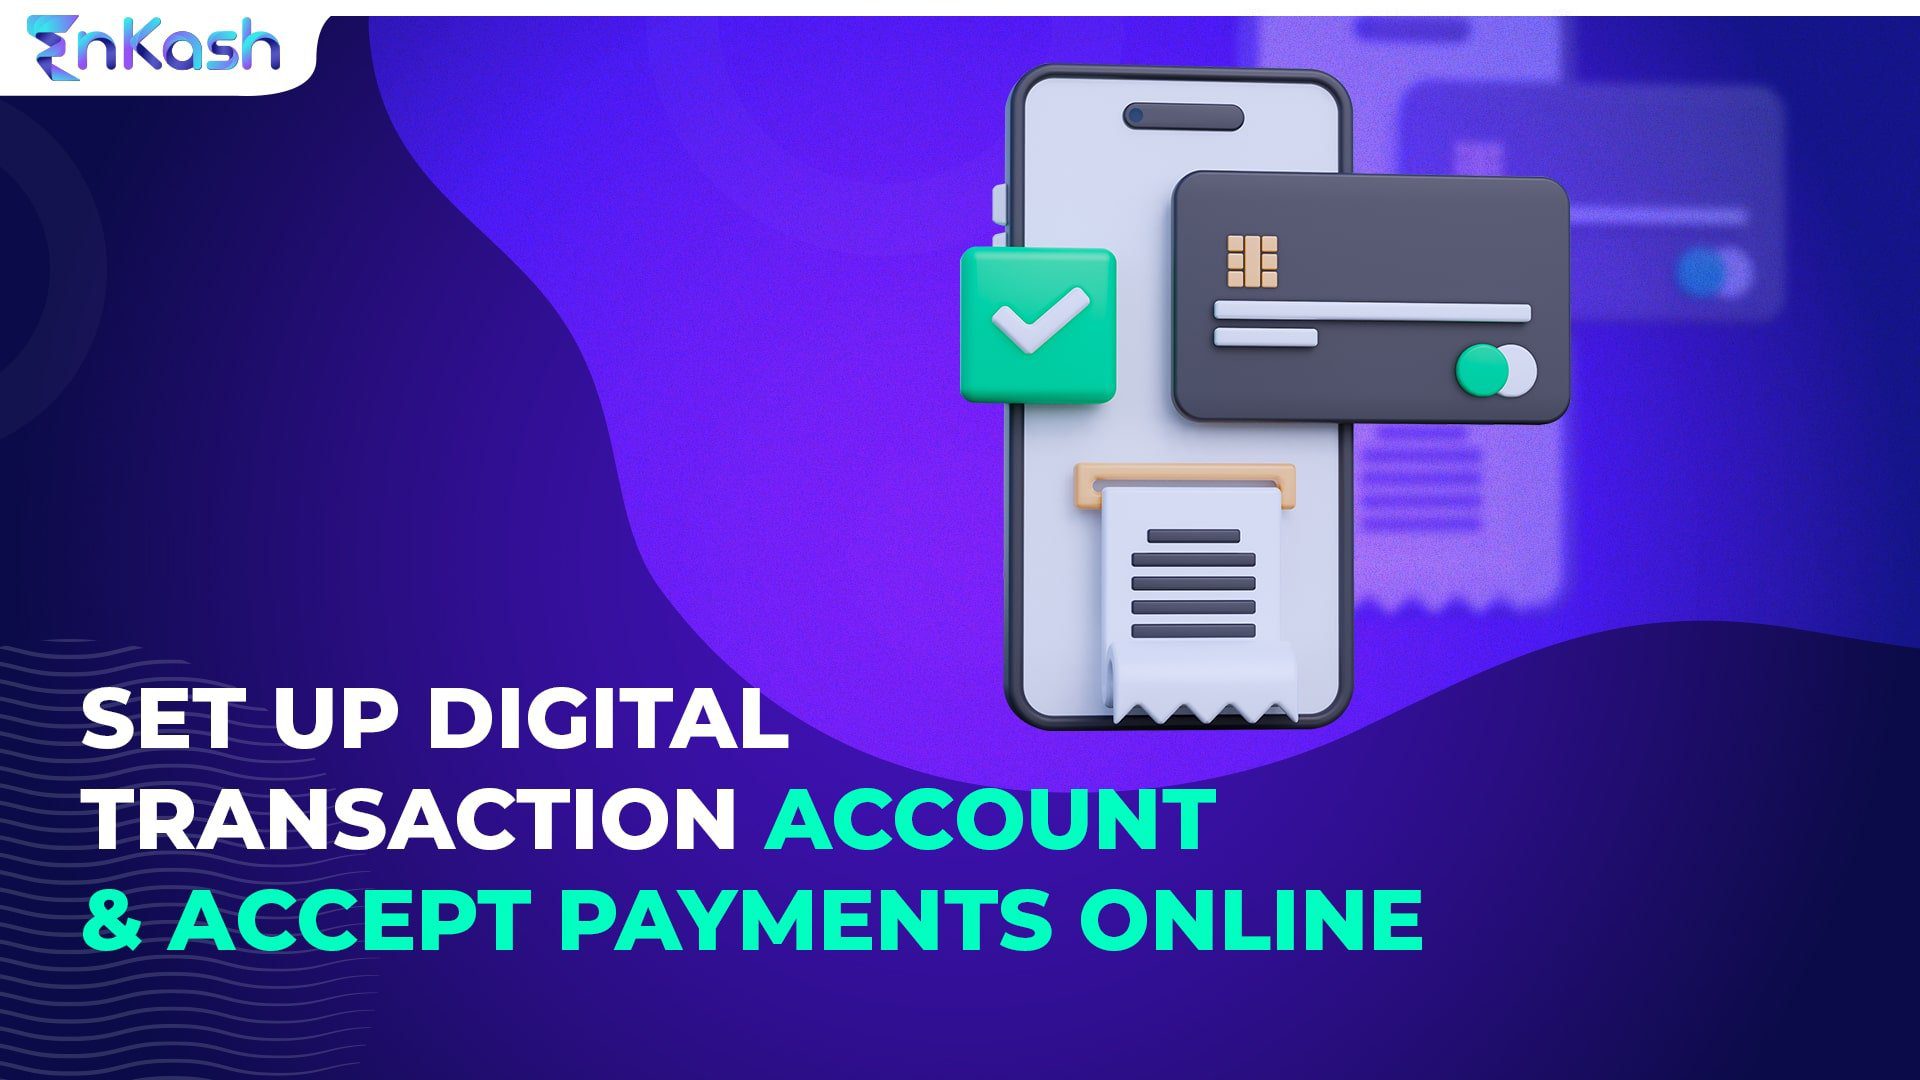 making payments online